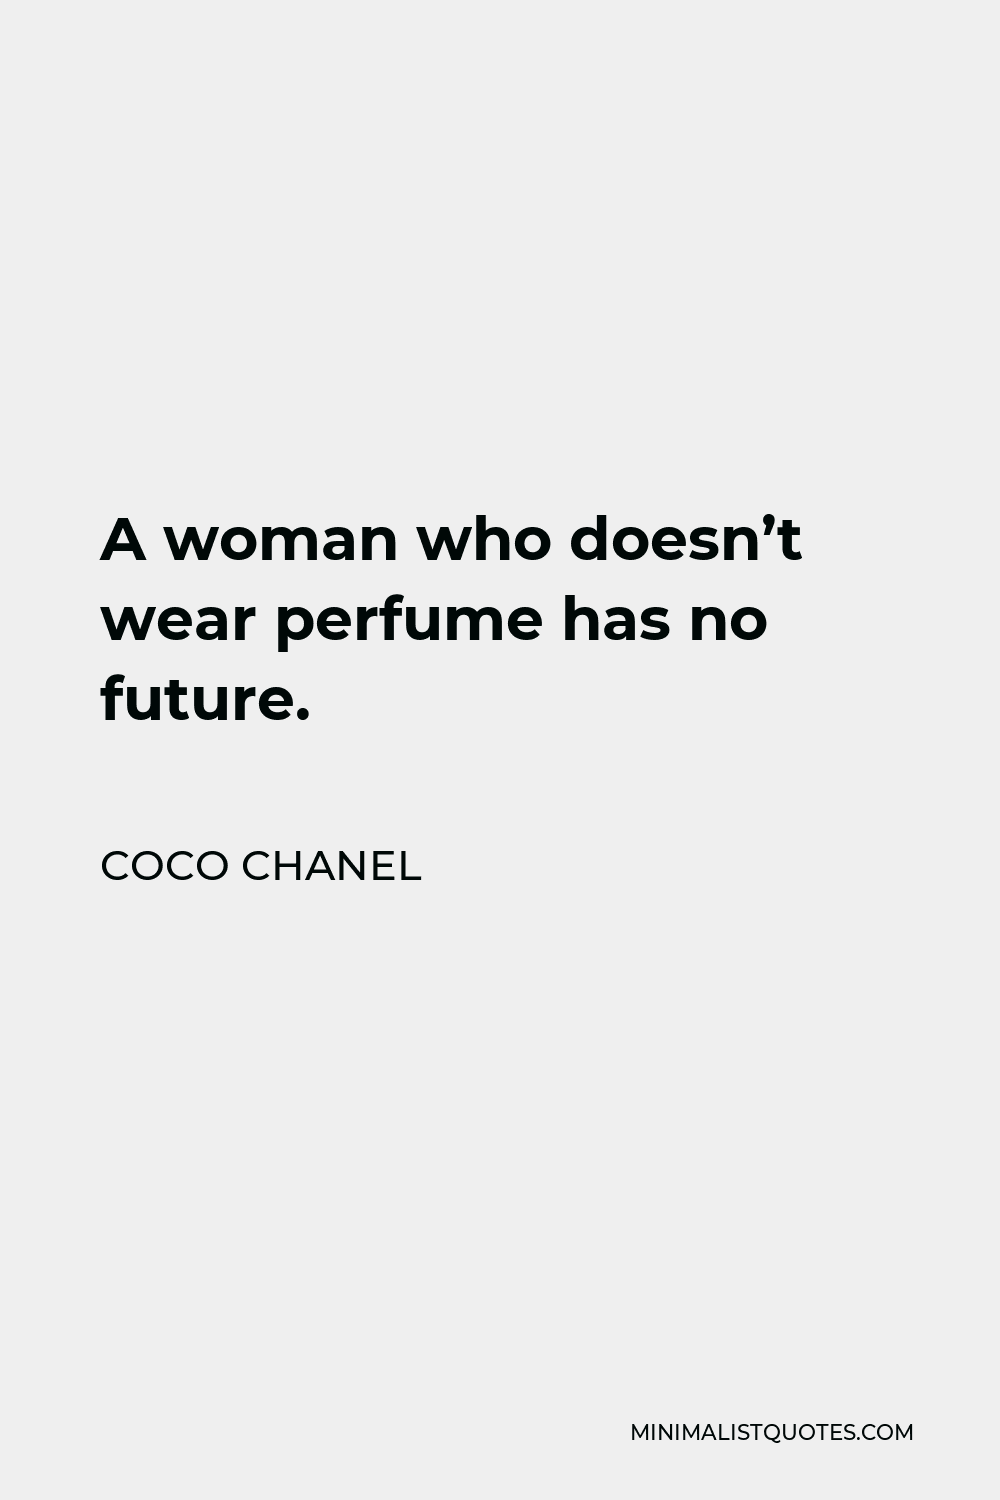 Coco Chanel A Woman Who Doesnt Wear Perfume Quote Wall Art Print  The  Card Zoo